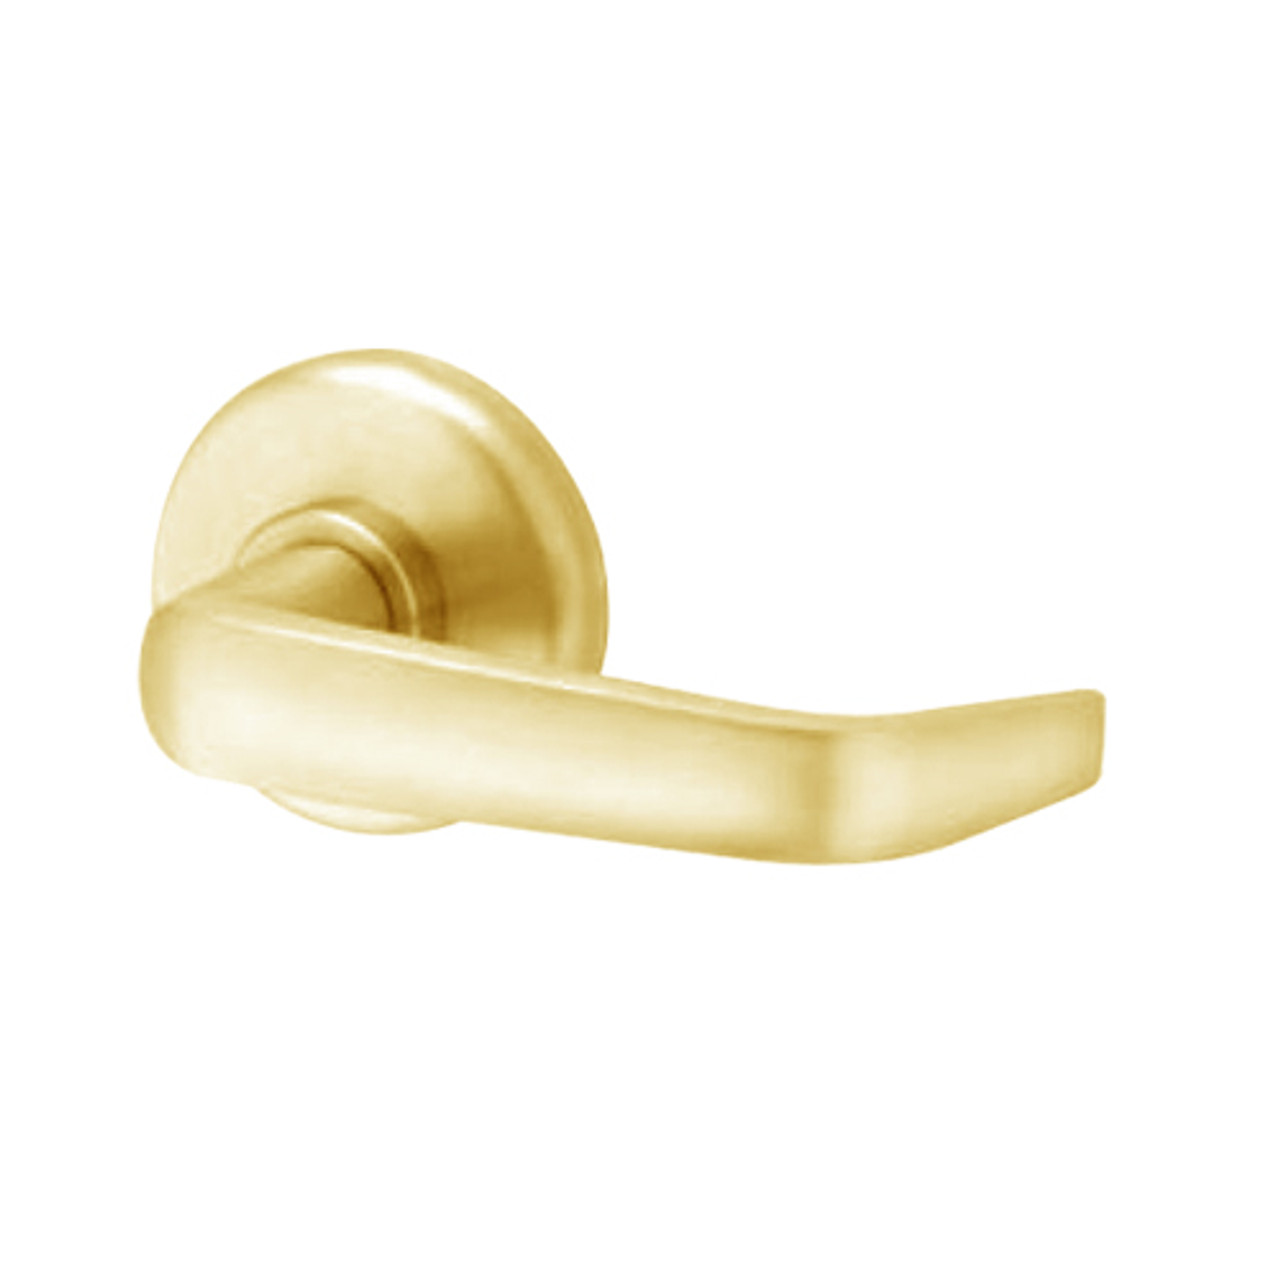 40HTKIS215H605 Best 40H Series Trim Kits Inside Lever w/ turn with Contour w/ Angle Return Style in Bright Brass